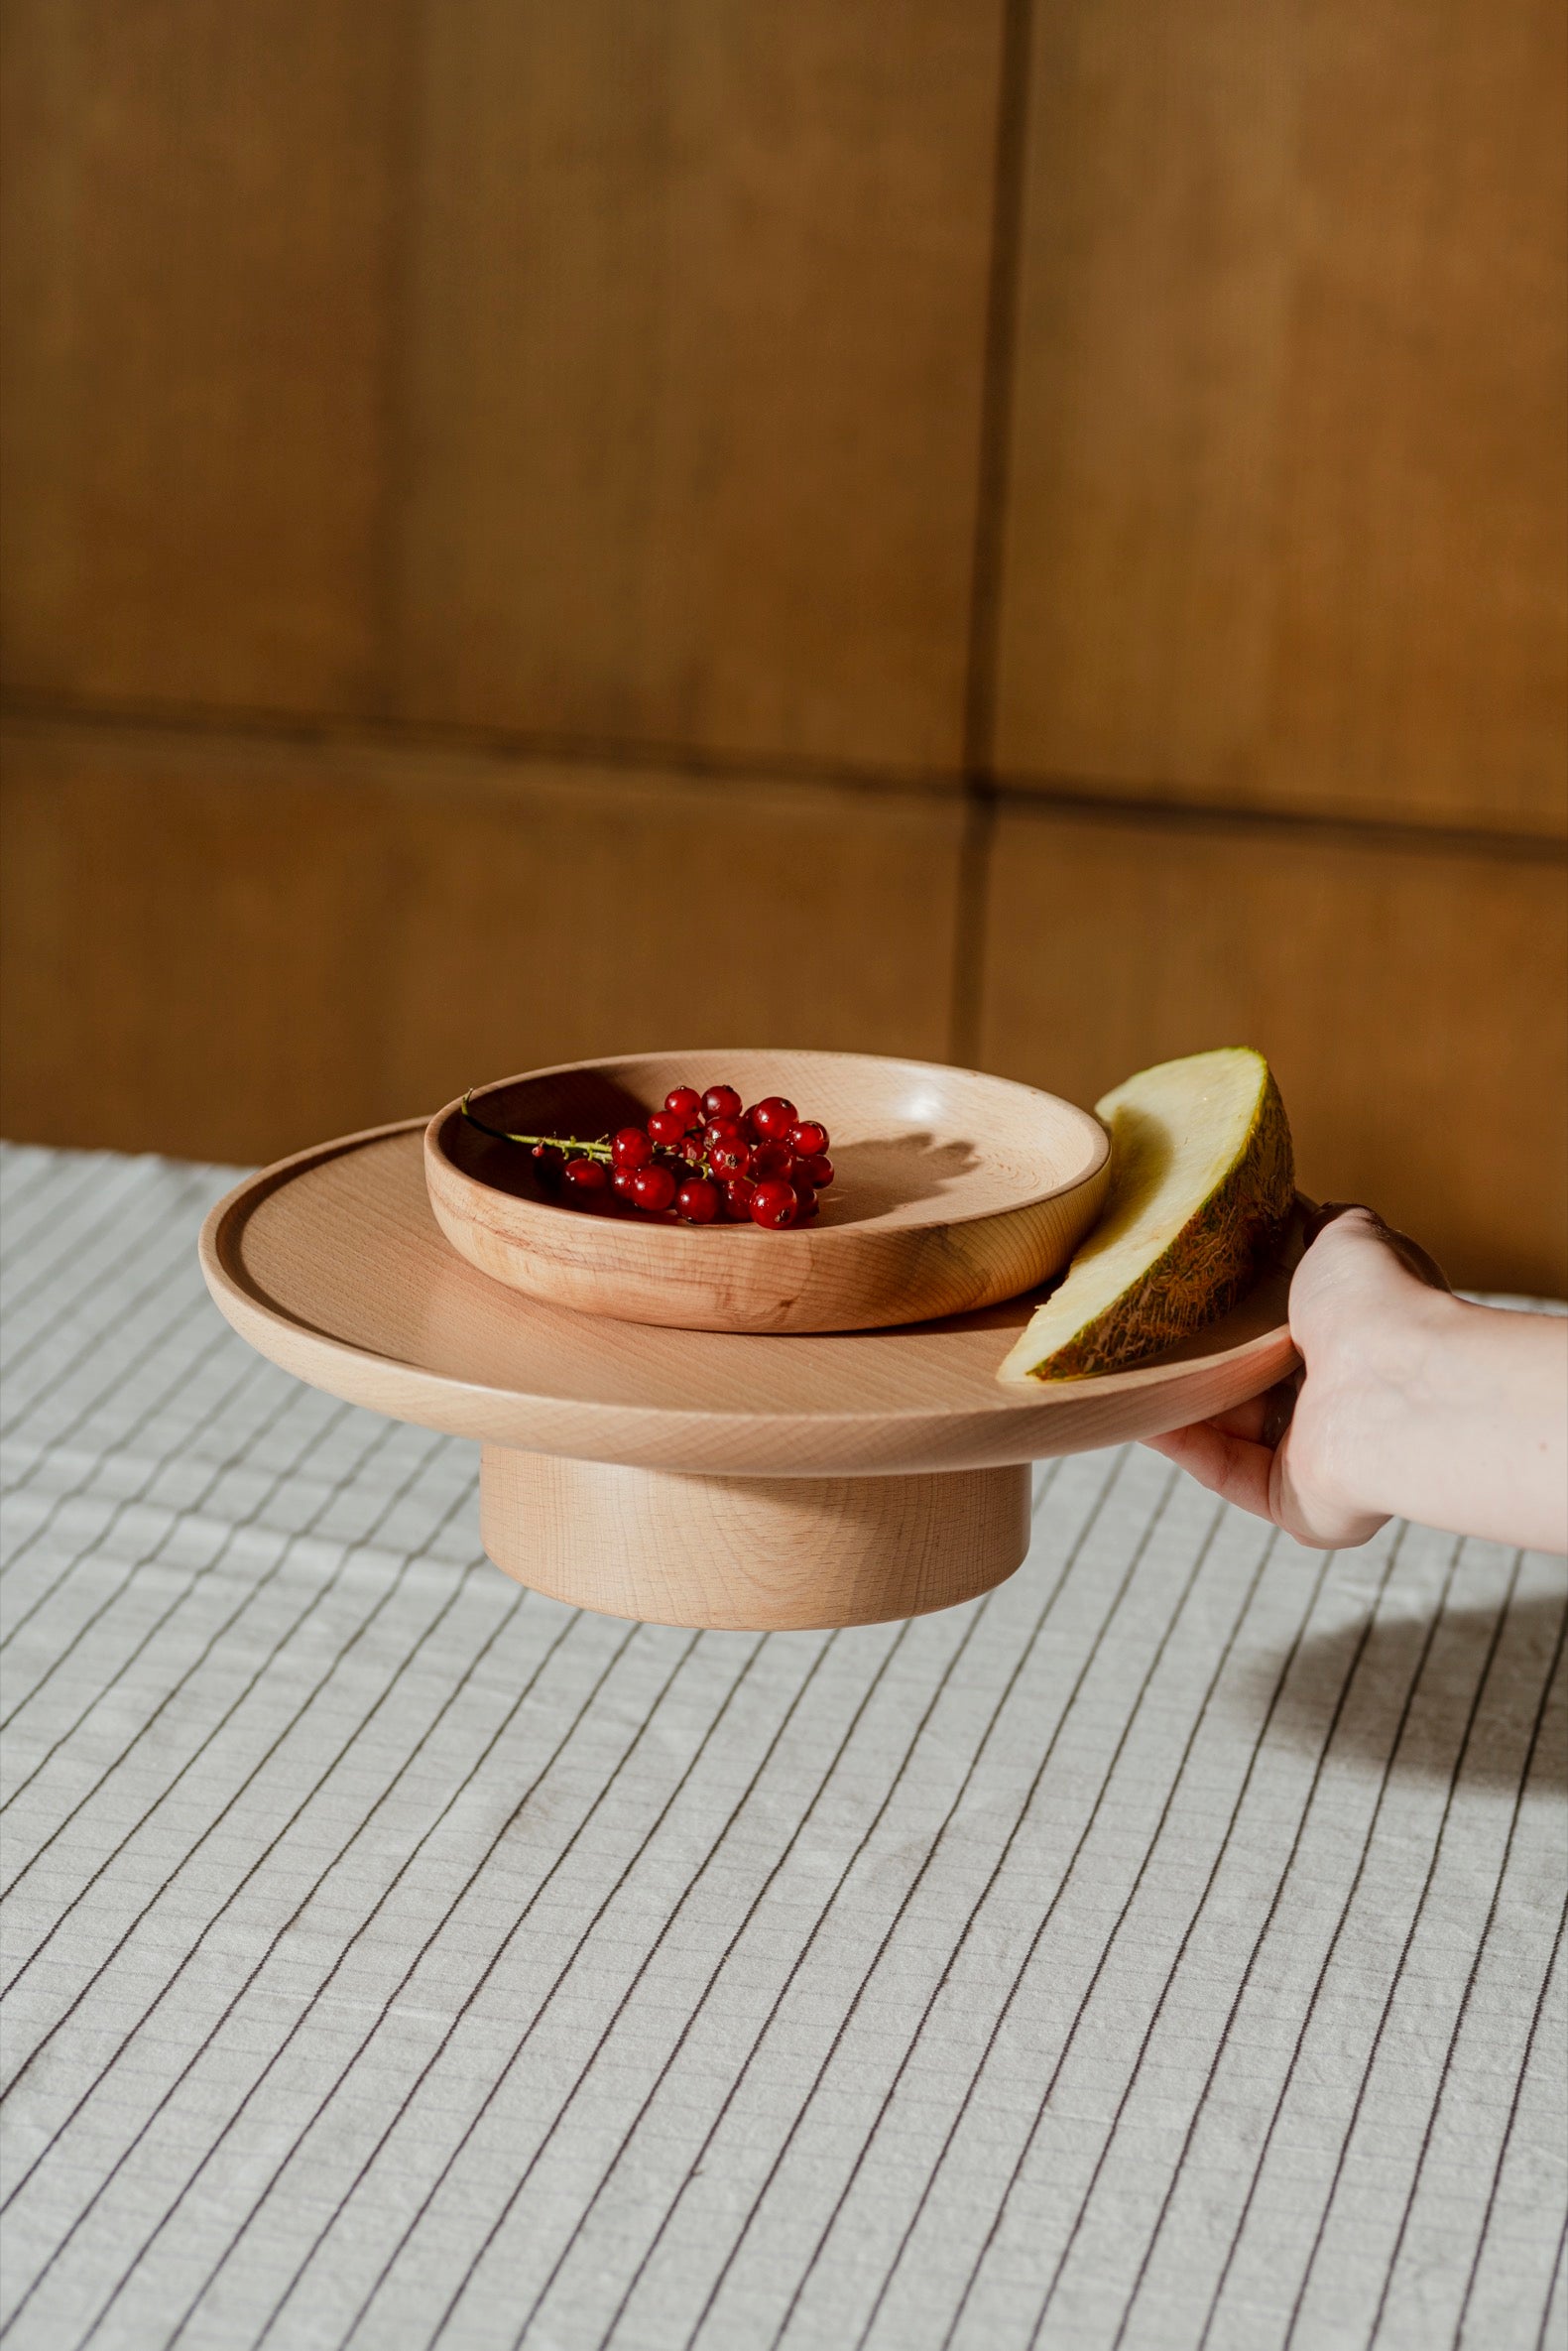 Oul Serving Platter and Bowl